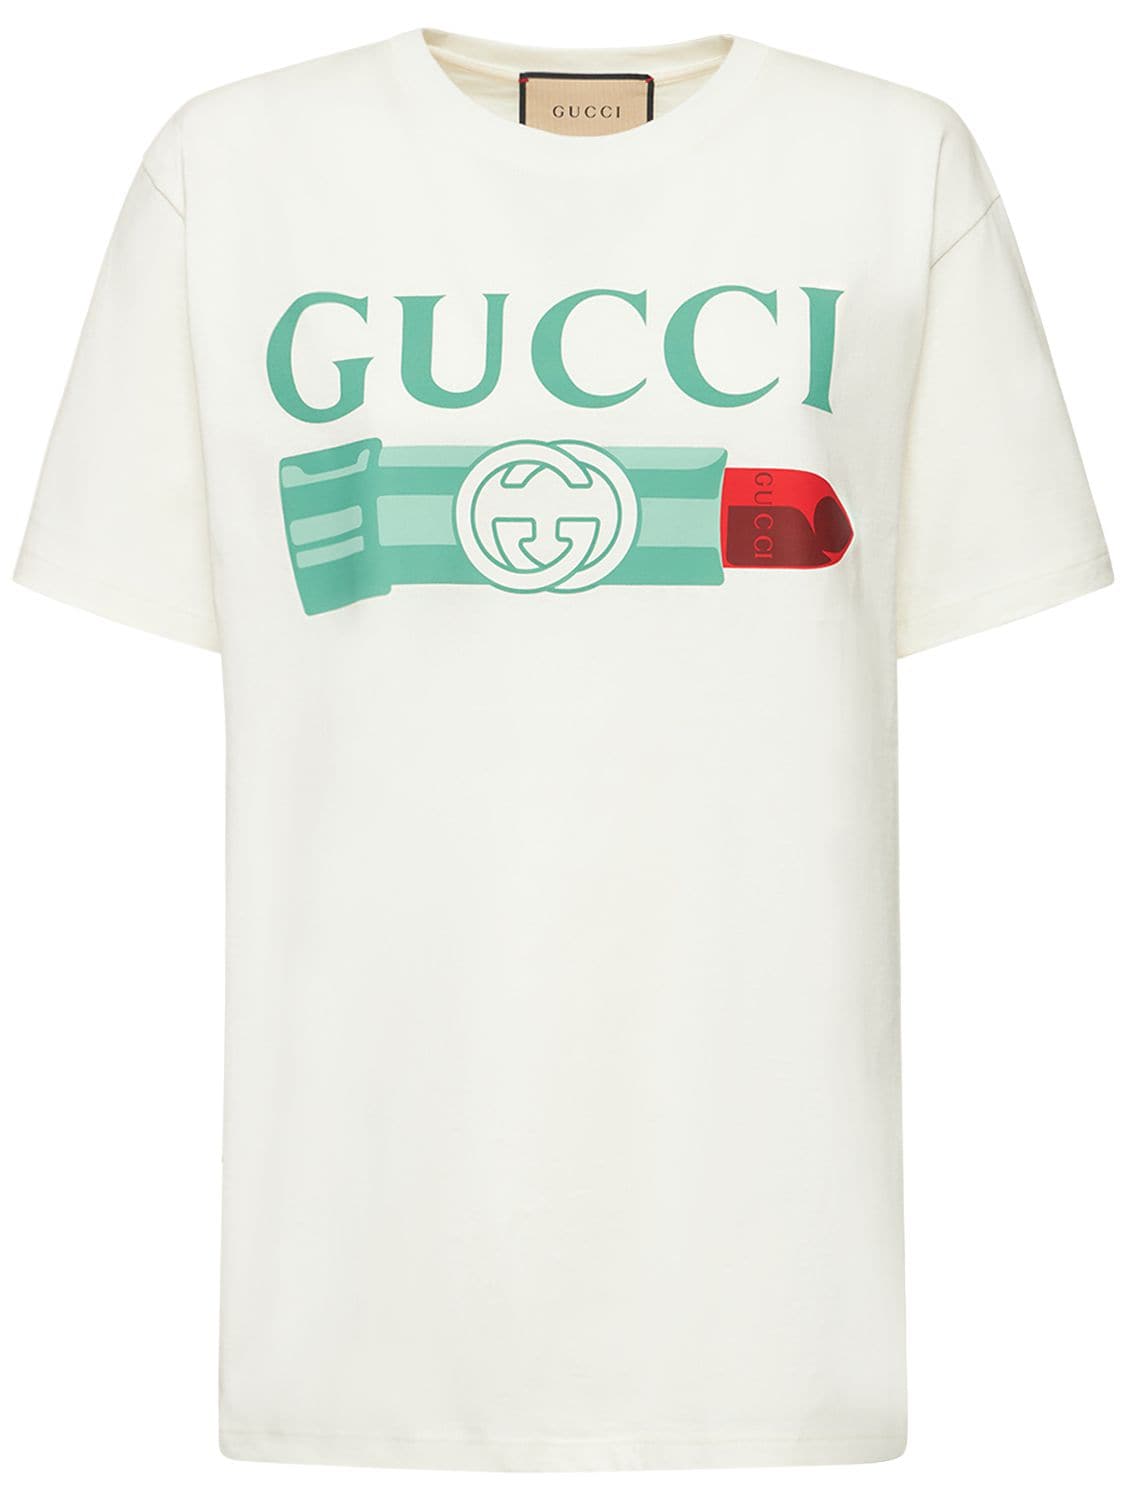 Image of G-loved Oversize Cotton T-shirt